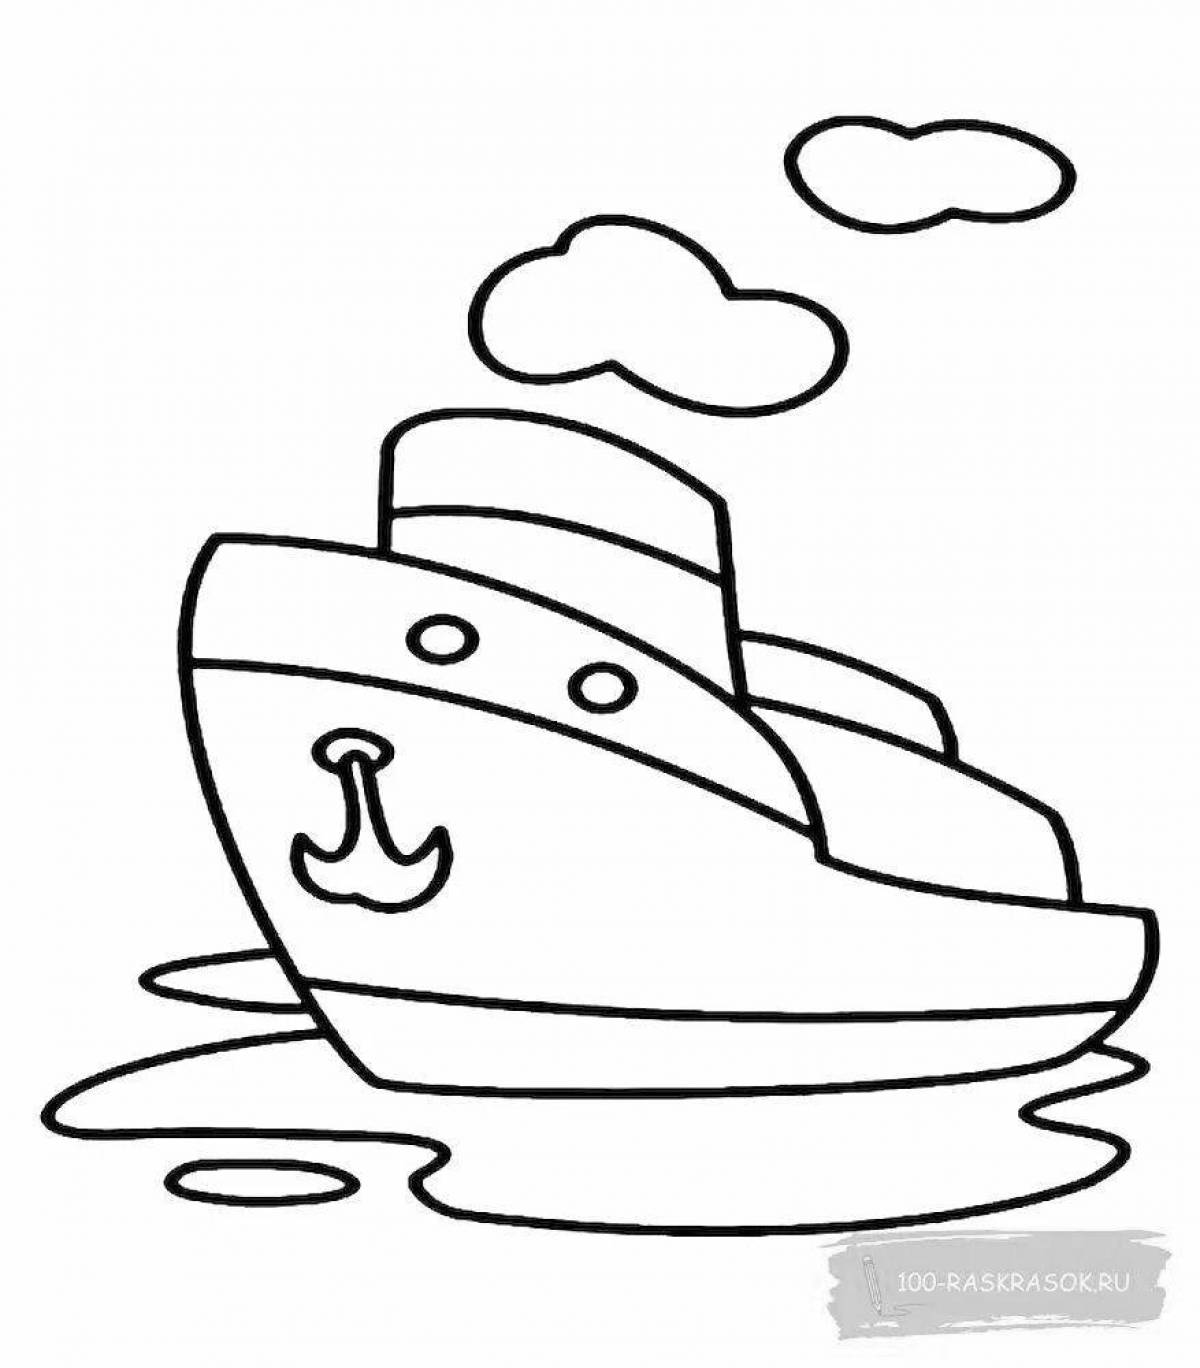 Amazing boat coloring book for 2-3 year olds